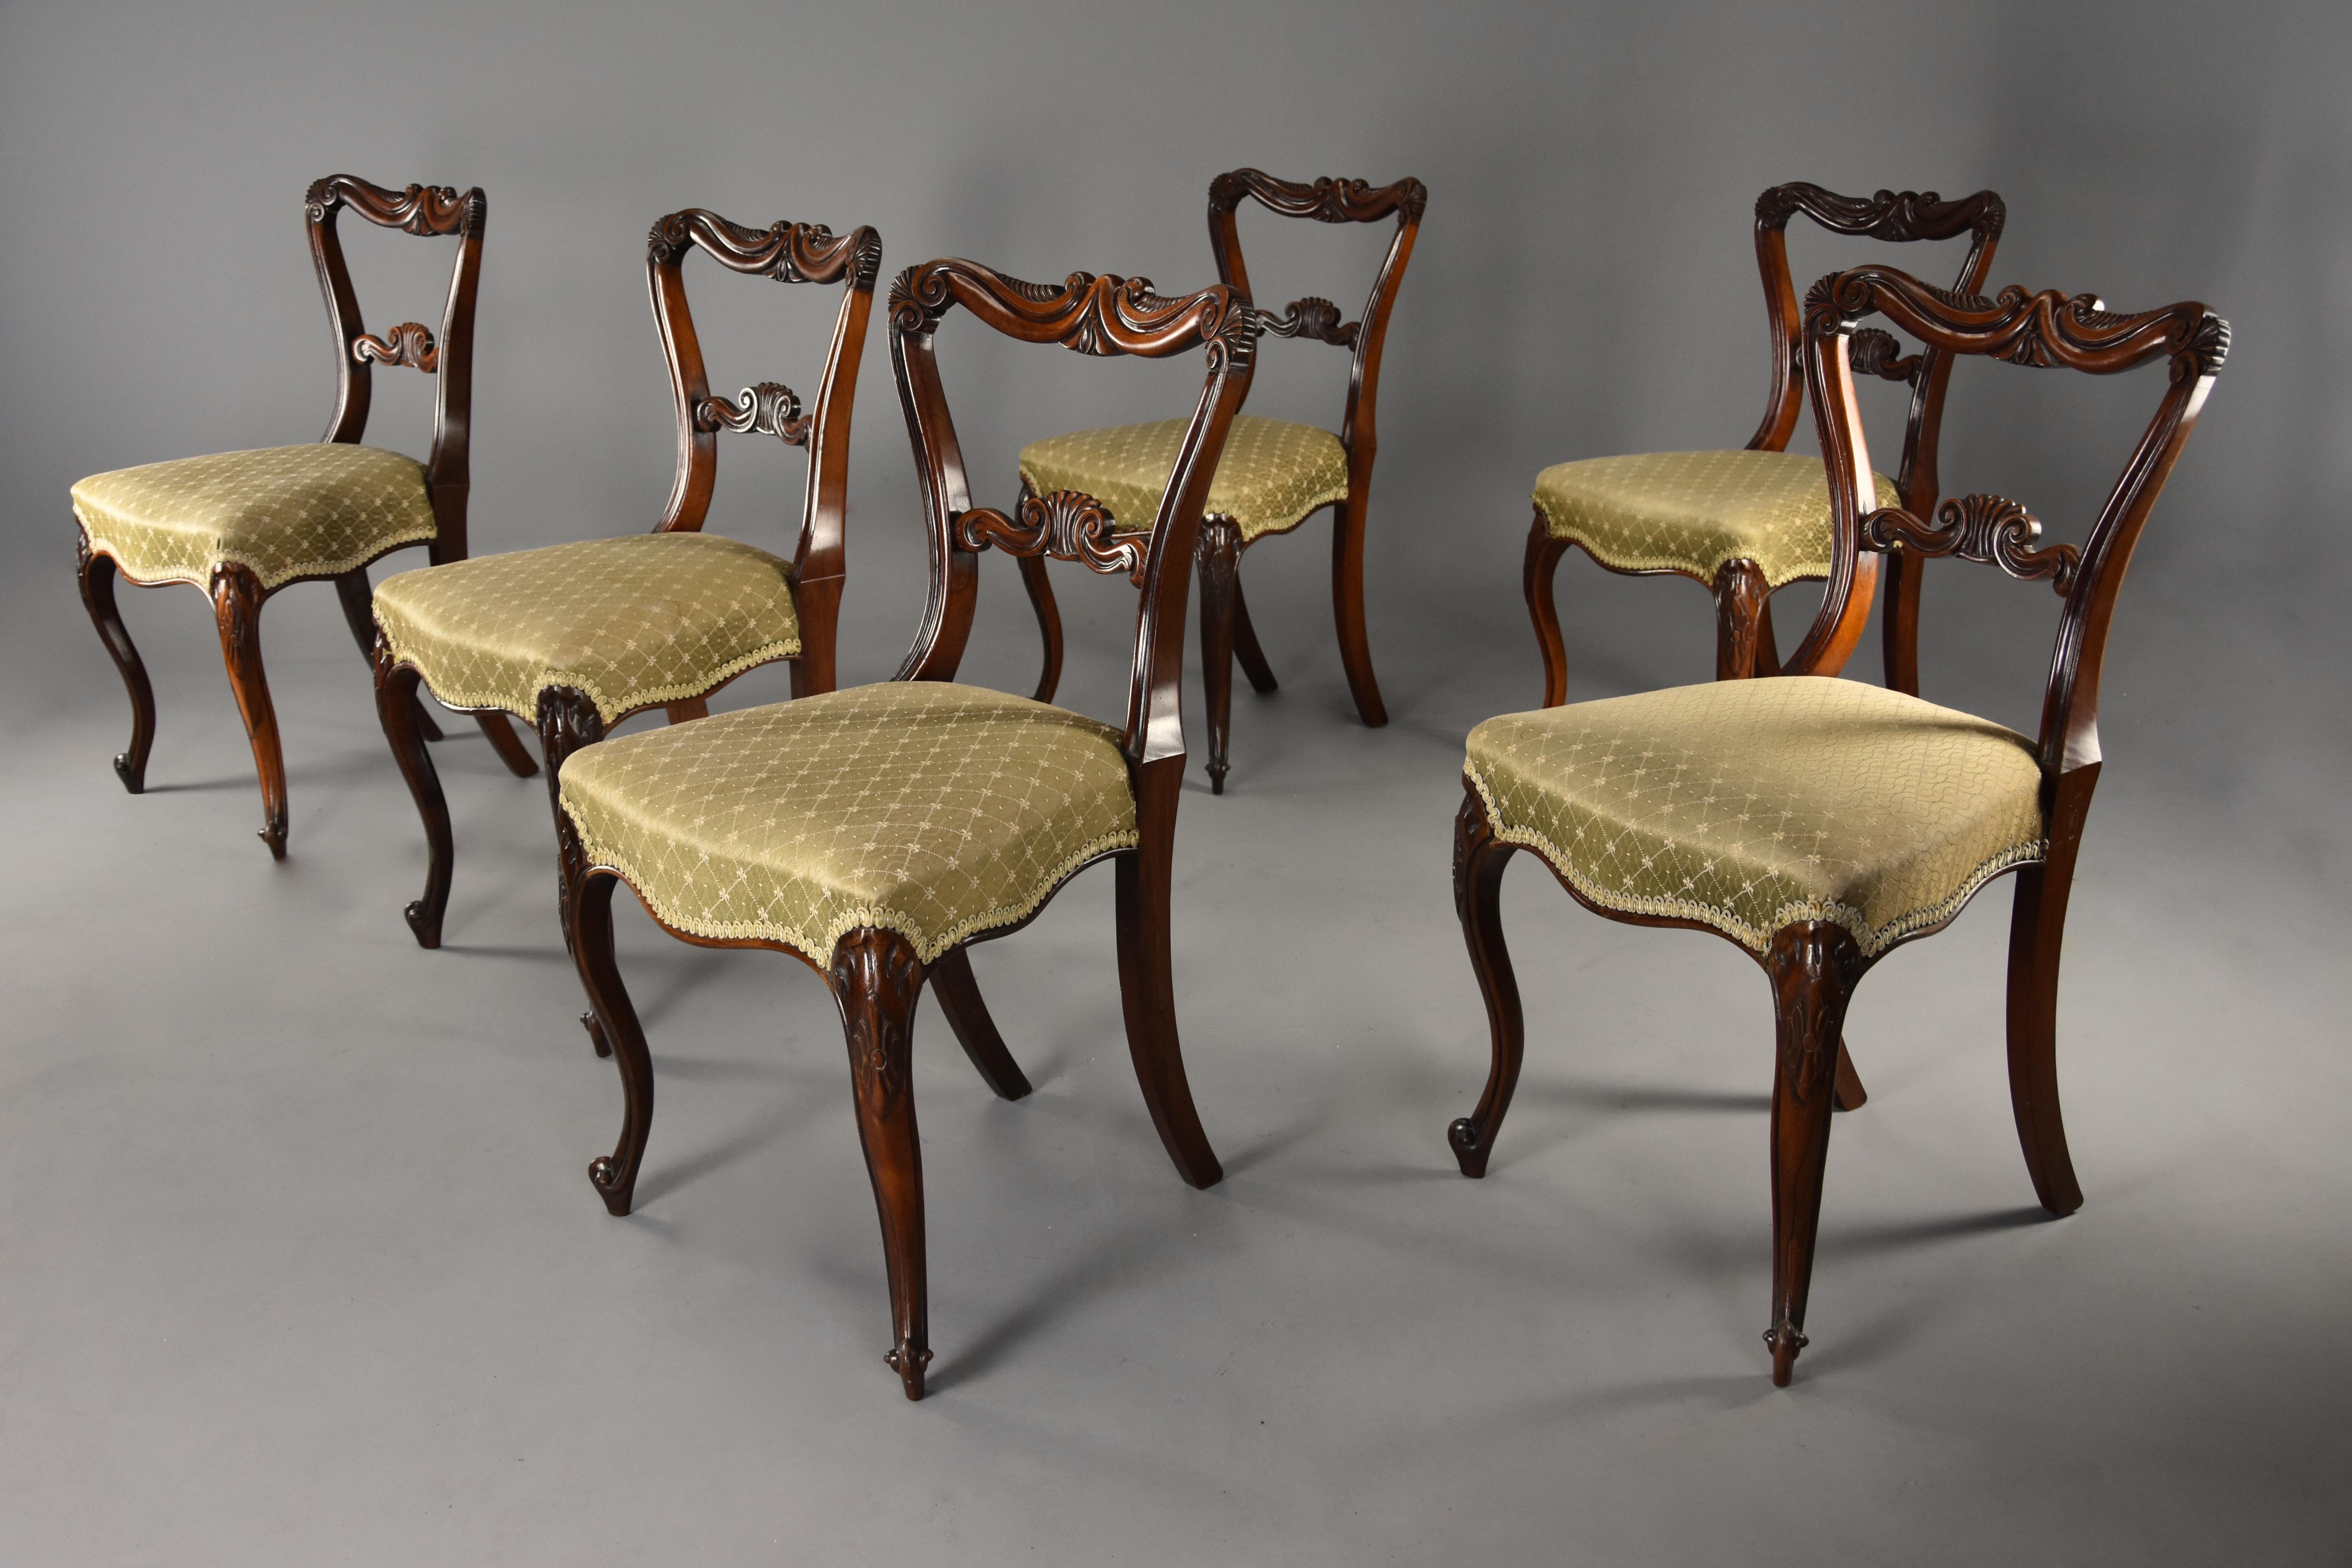 English Fine Quality Early to Mid-19th Century Set of Six Rosewood Dining Chairs